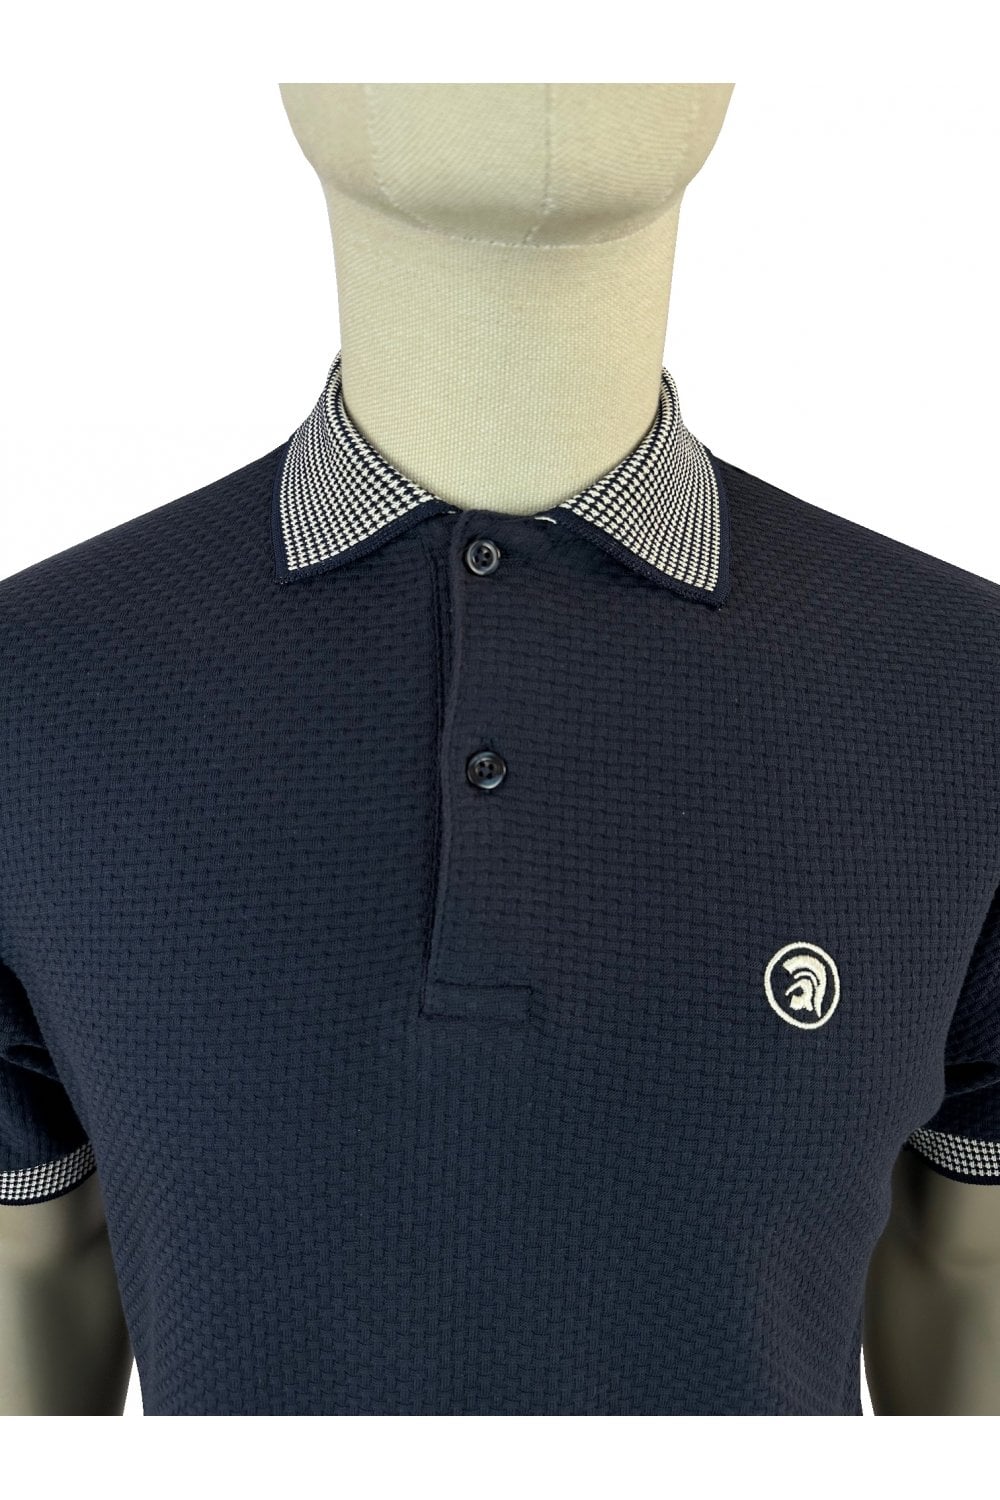 TROJAN Basket Weave Polo with jacquard collar and cuffs TR/8870 Navy - Raw Menswear